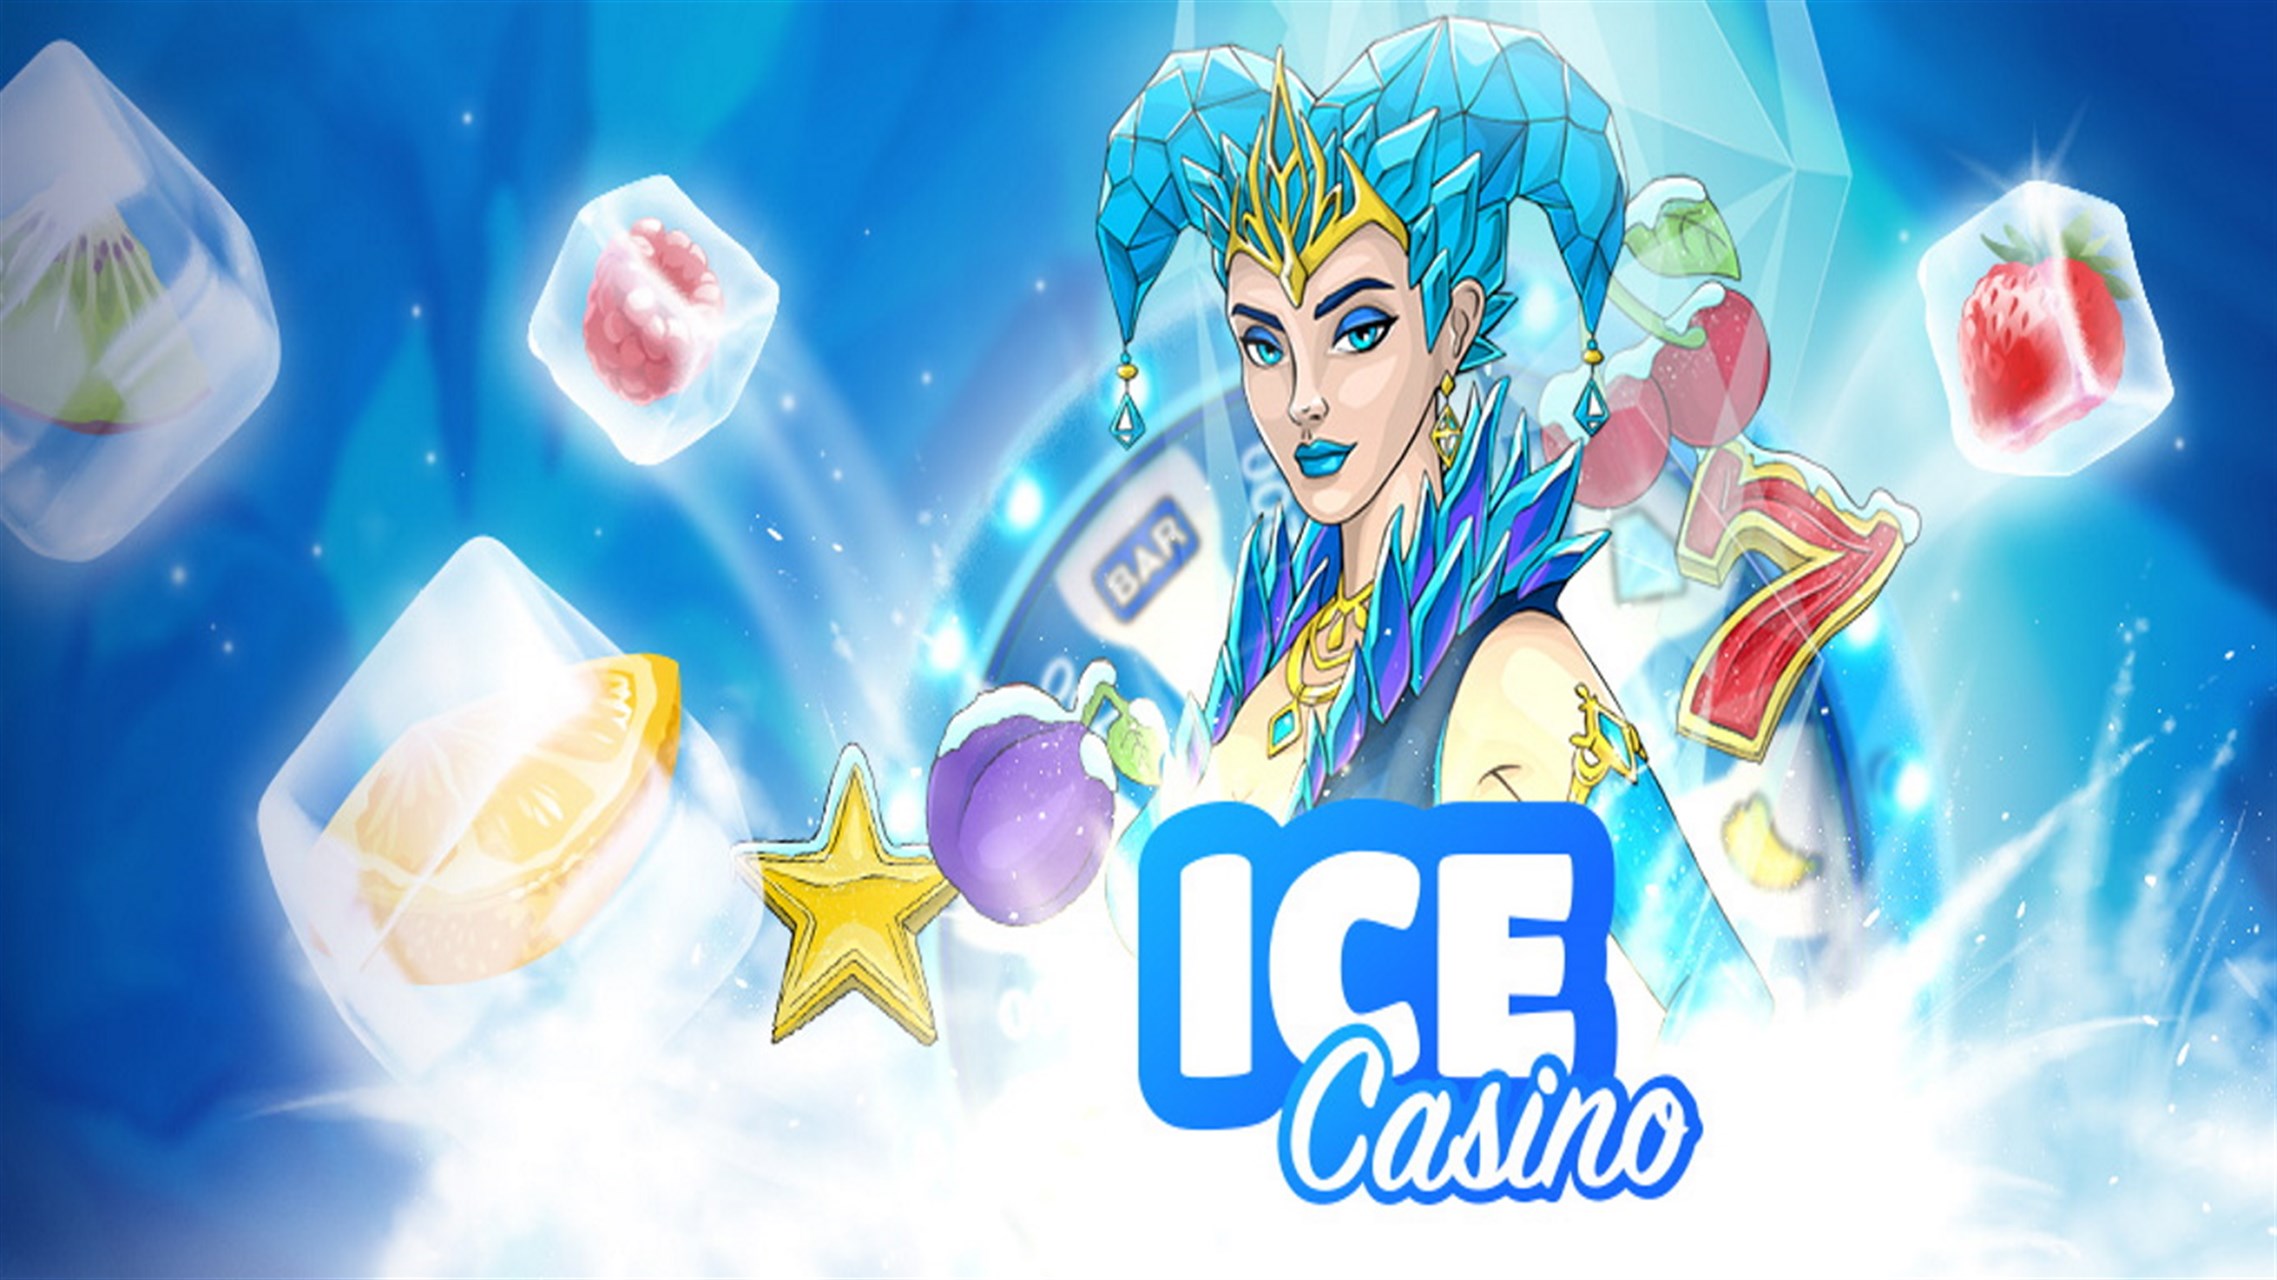 Start Your Online Gambling Journey Today With ICE Casino!